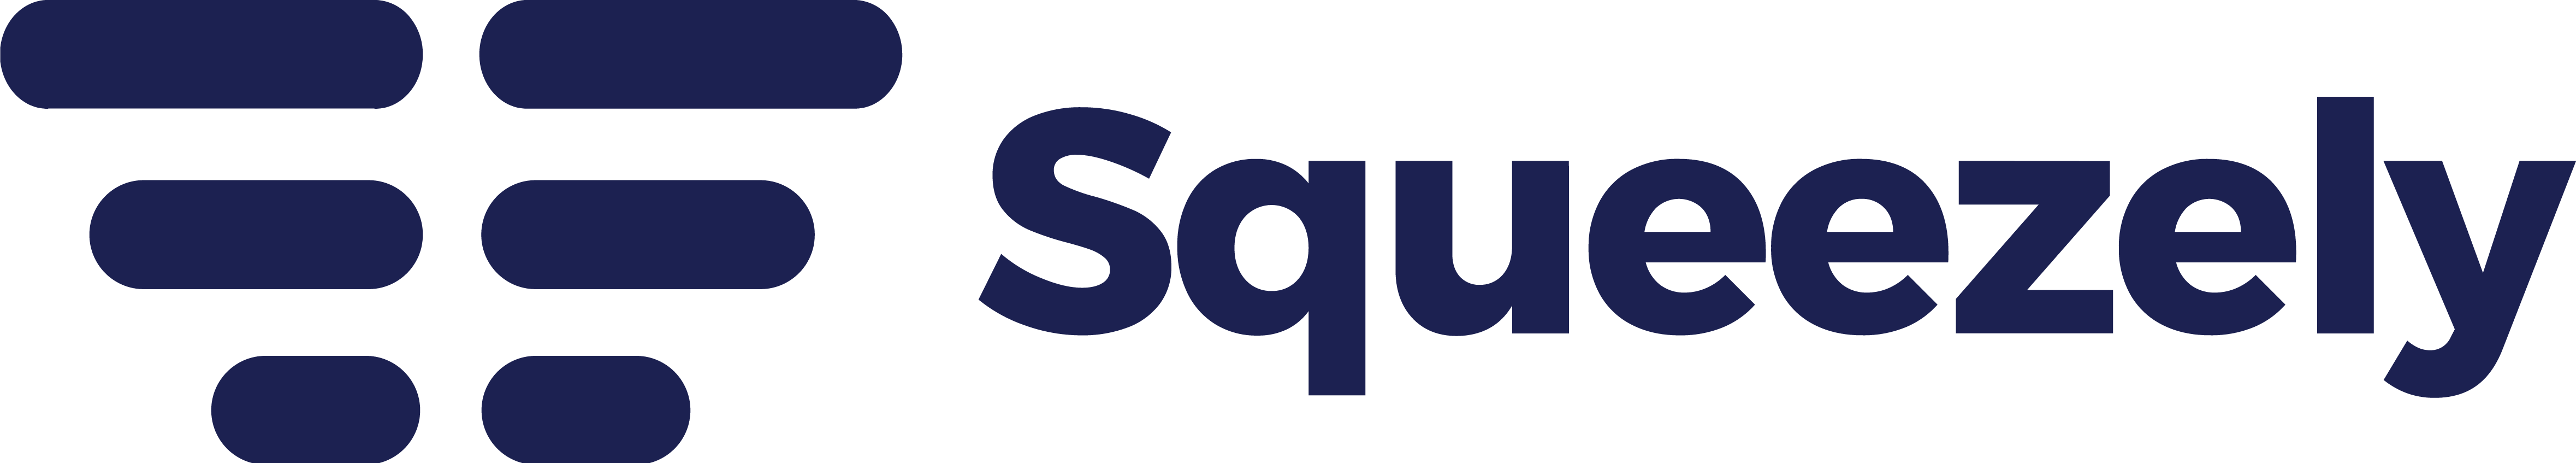 Squeezely logo